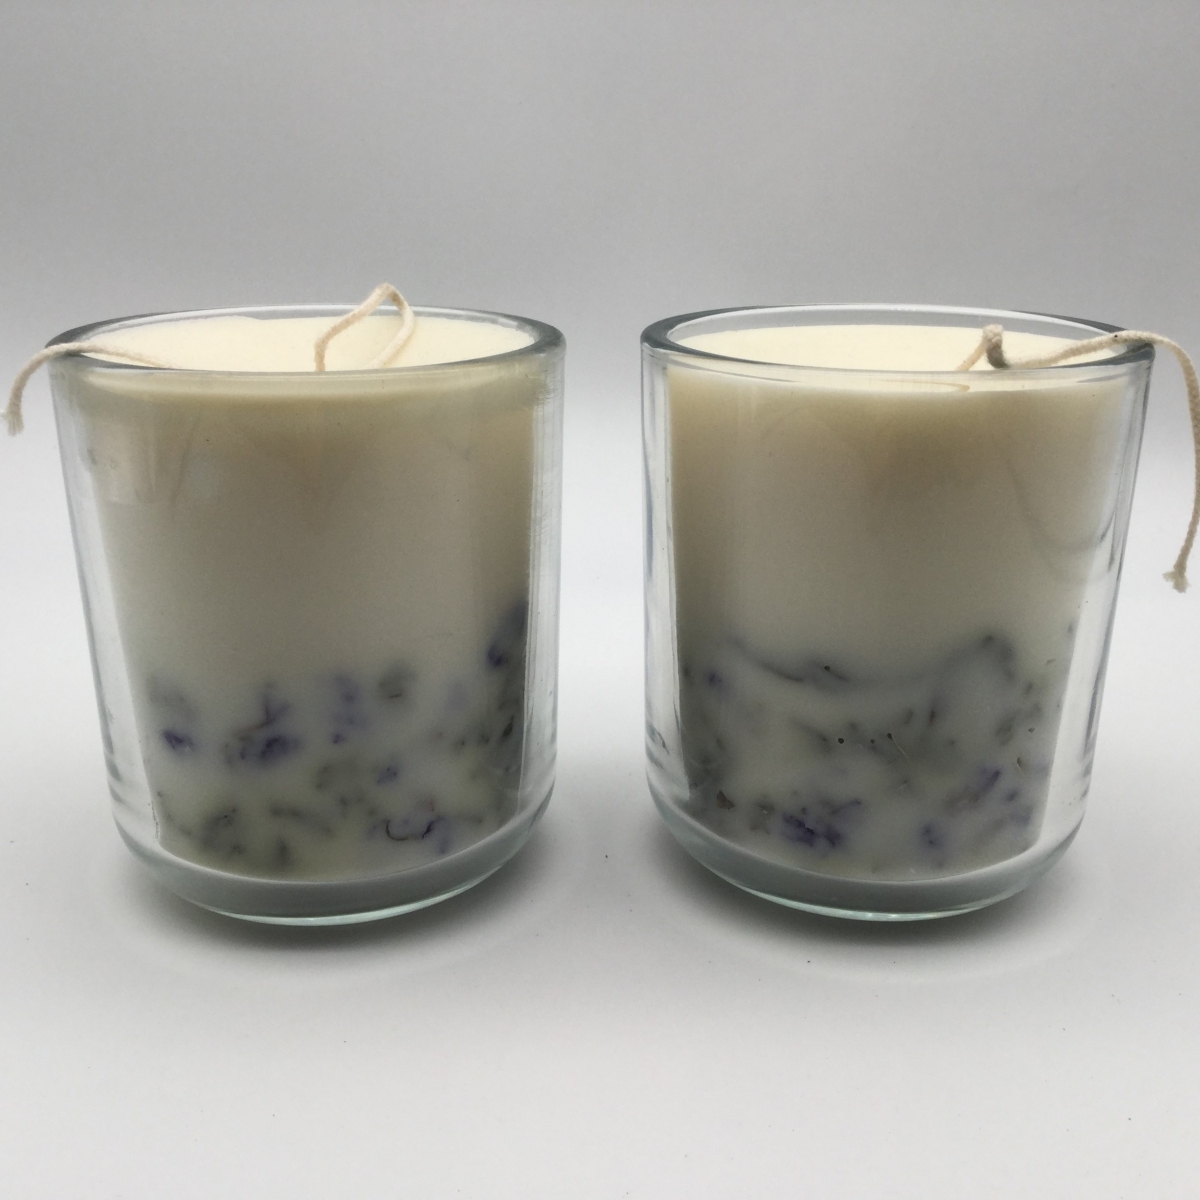 Scented Candles :Soy Wax, Lavender, Dried Flower Candles, China Factory ,Wholesale ,Price-HOWCANDLE-Candles,Scented Candles,Aromatherapy Candles,Soy Candles,Vegan Candles,Jar Candles,Pillar Candles,Candle Gift Sets,Essential Oils,Reed Diffuser,Candle Holder,